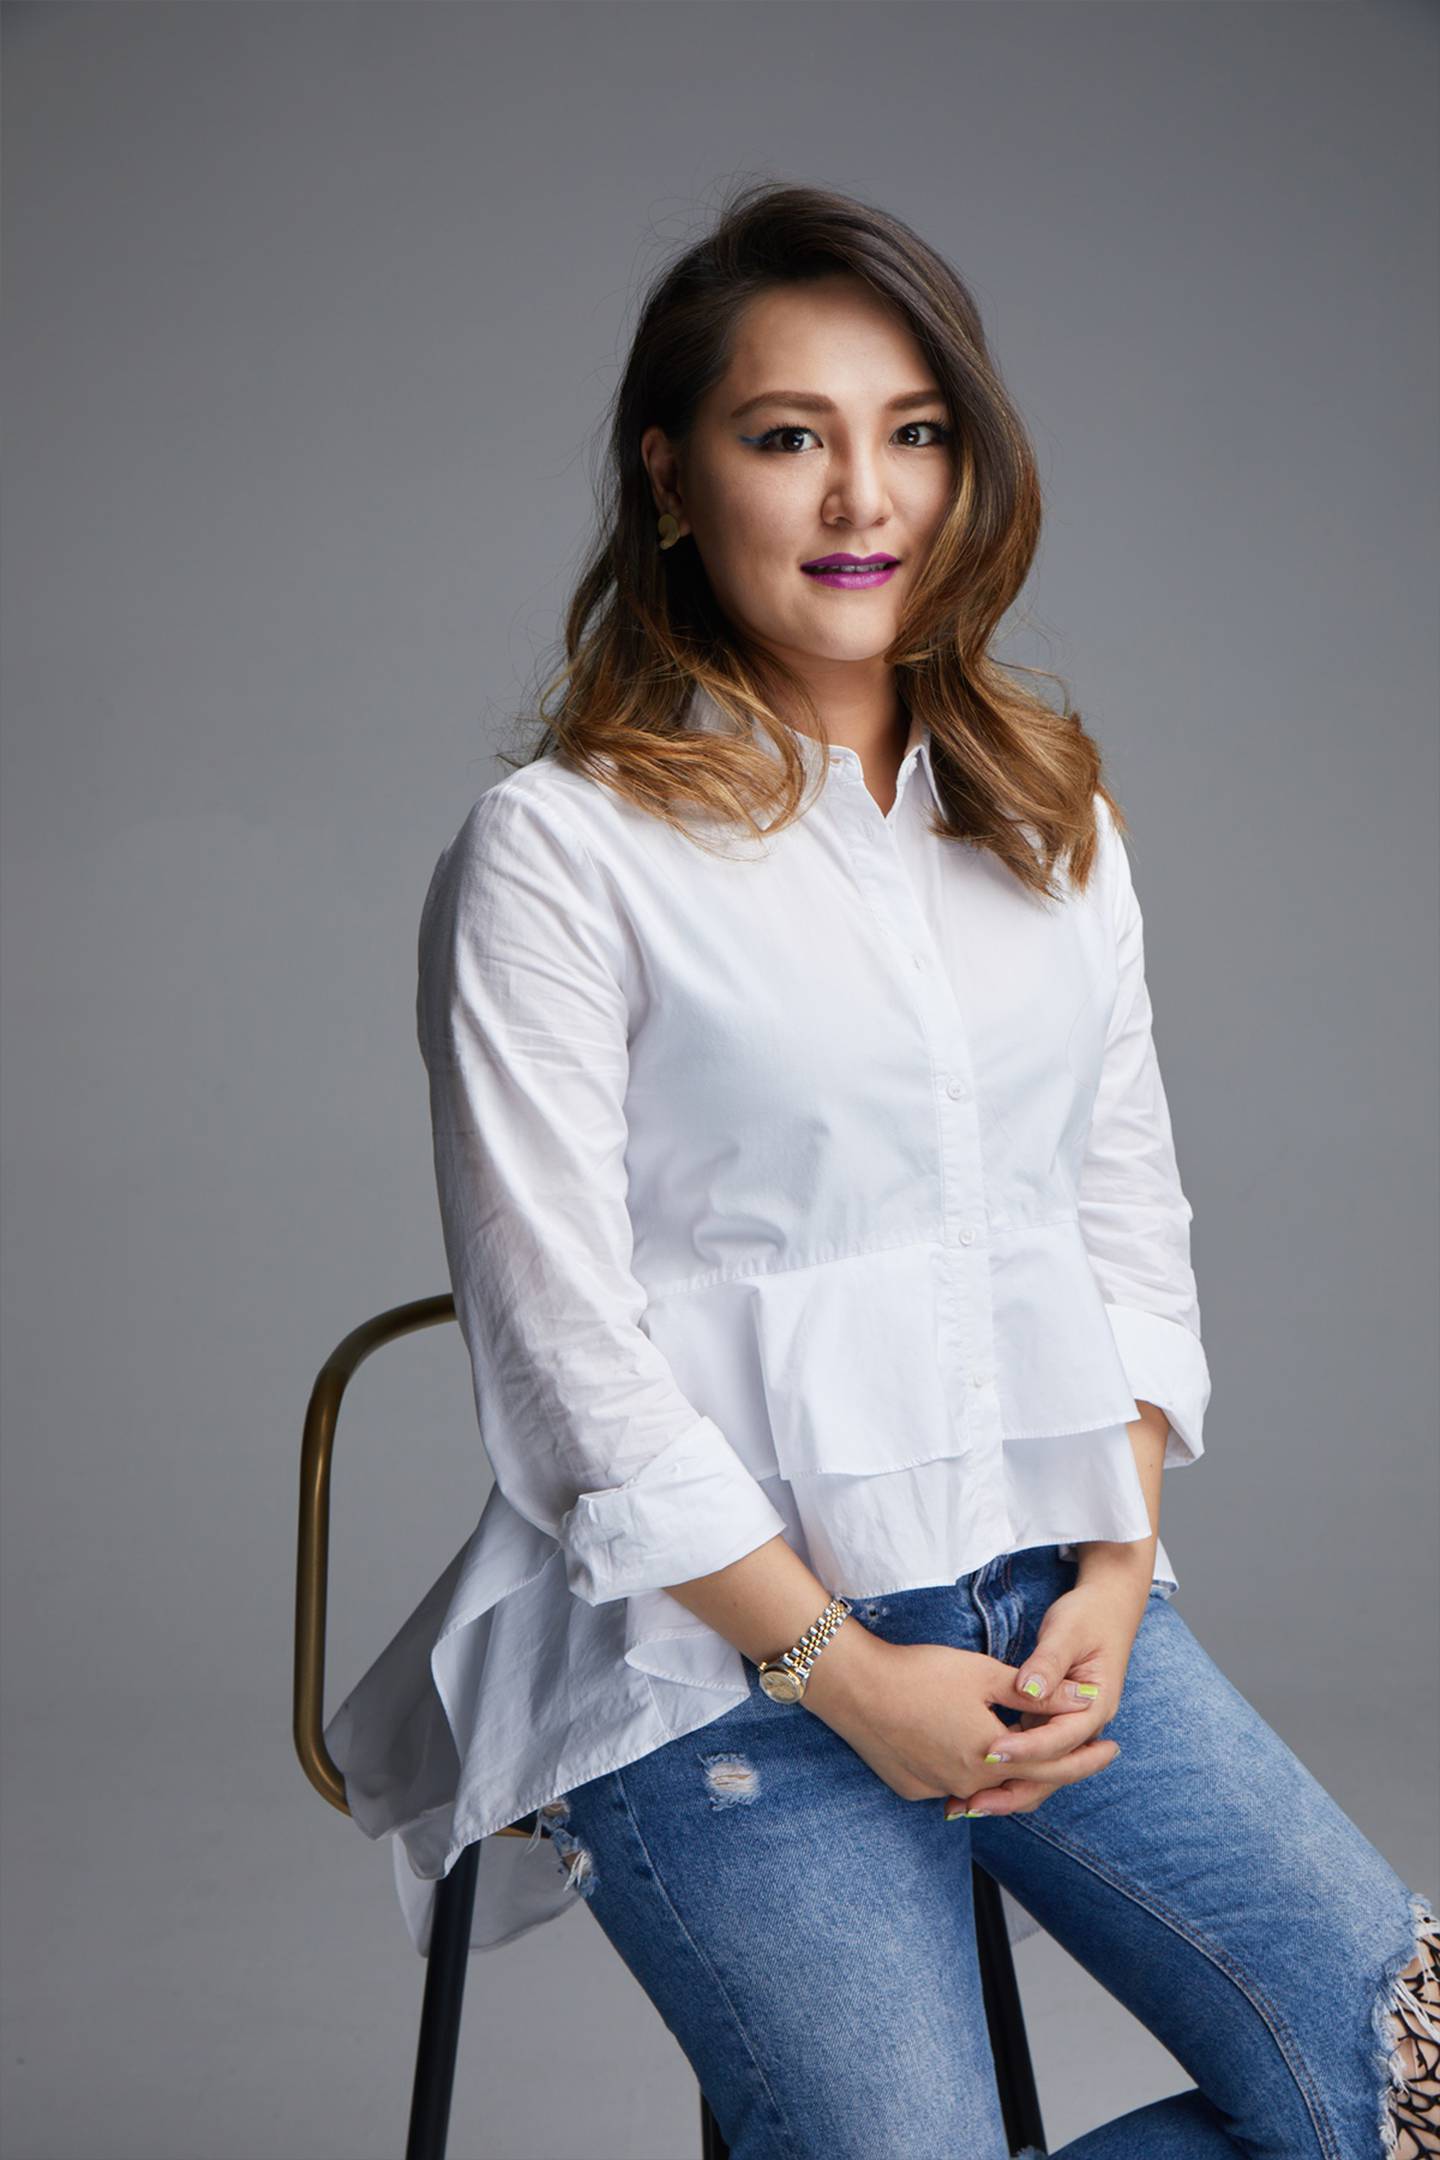 Gabby YJ Chen - global expansion president of Chinese beauty brand Florasis 花西子.